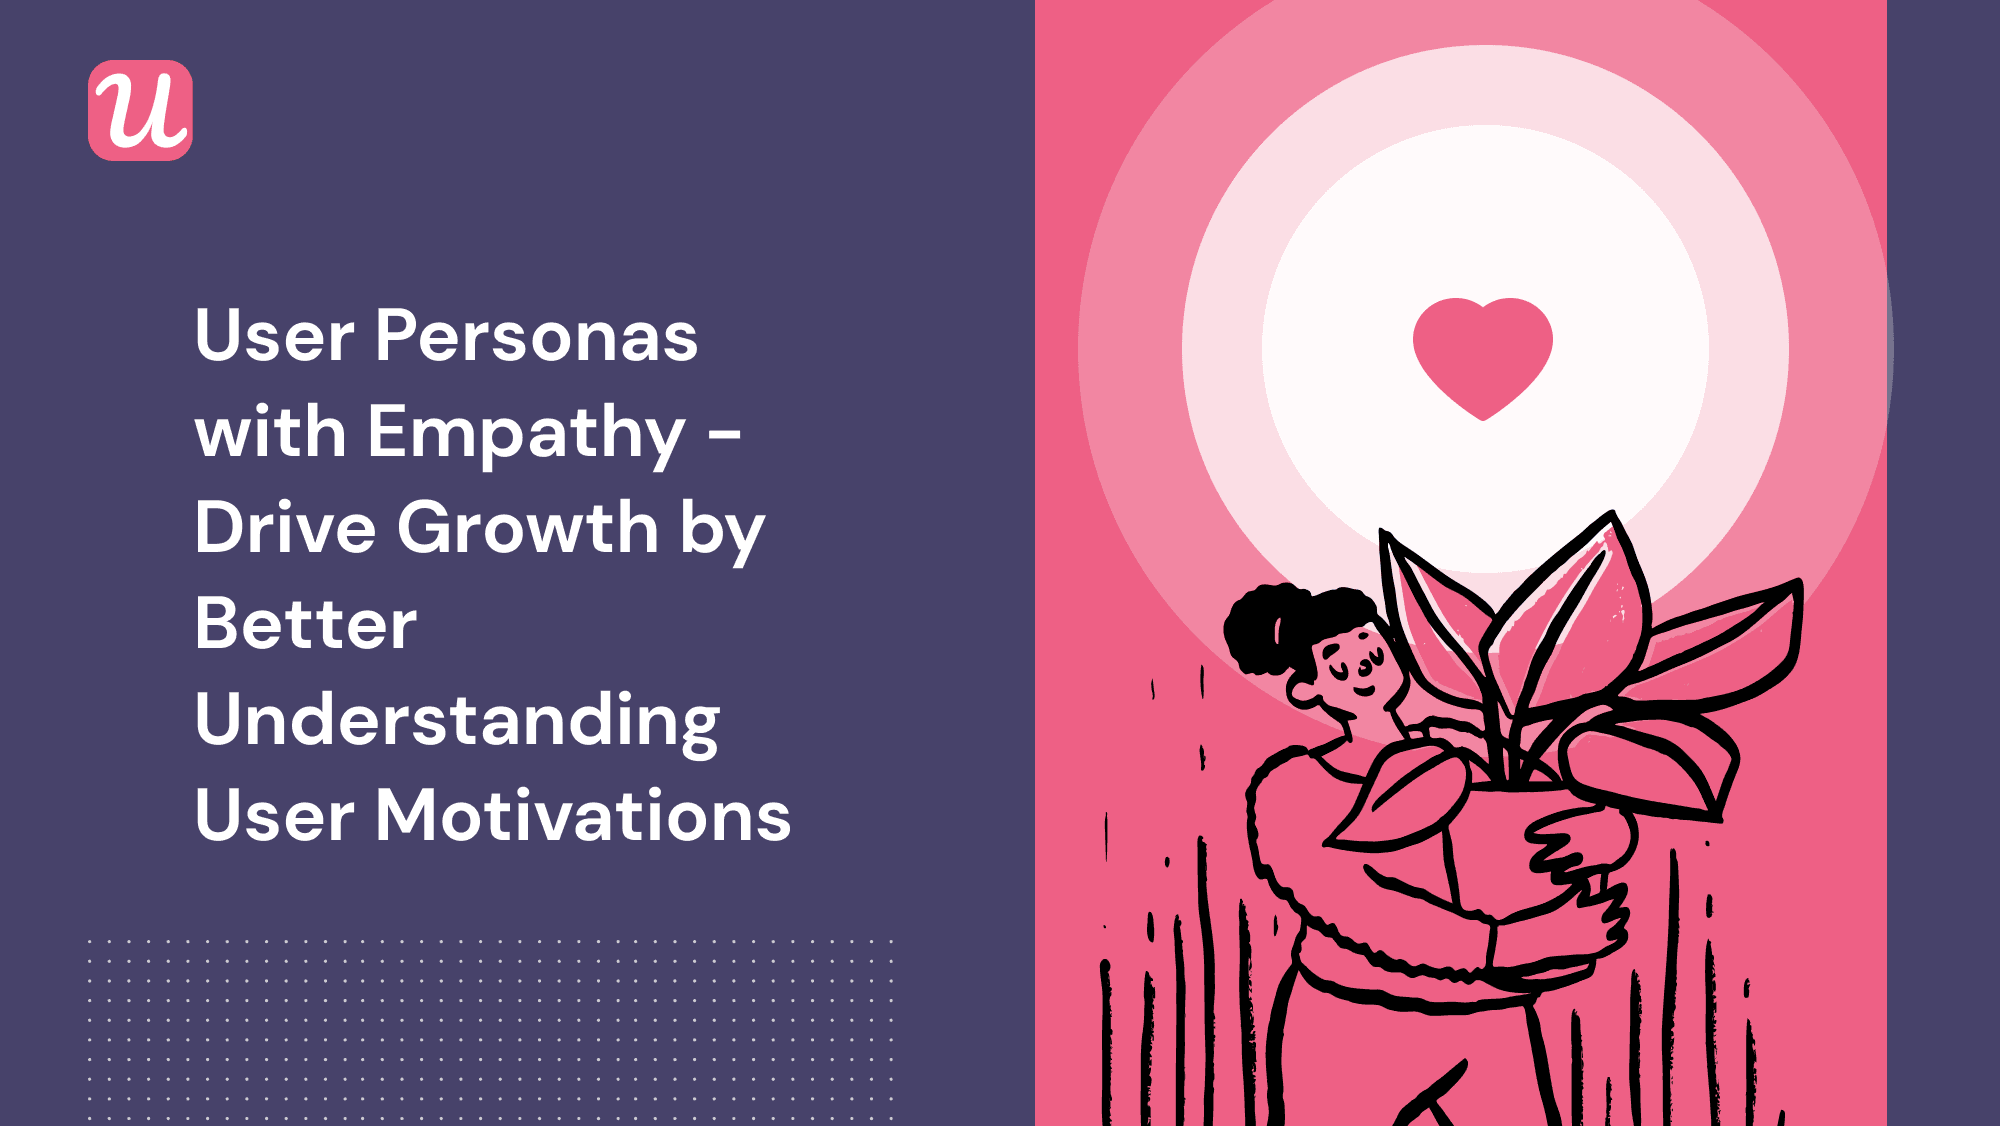 User Personas with Empathy - How to Drive Growth and Improve Product Experience by Better Understanding User Motivations